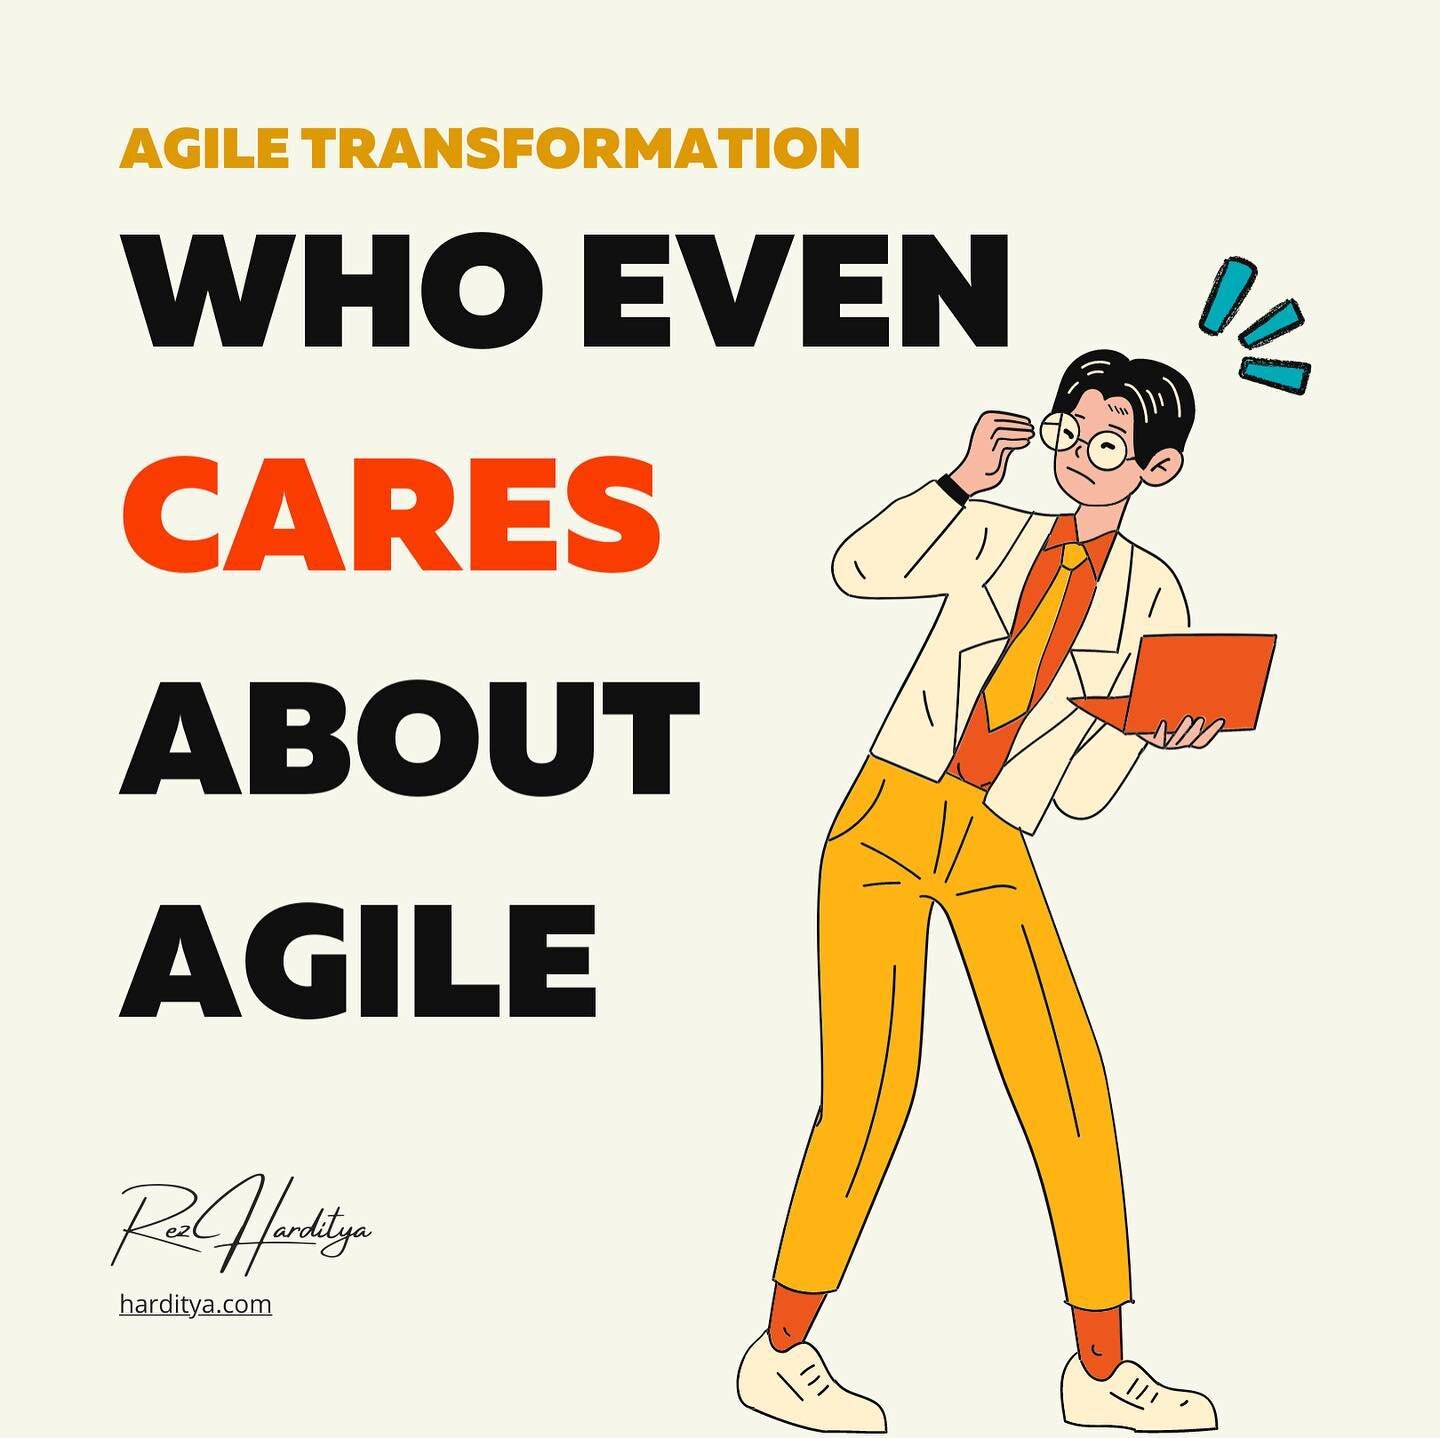 ‪Does agile even matter?‬
‪If so, how does it matter to you?‬

‪With so many versions of agile practices, it's easy for us to get caught up on things that don't really matter in the bigger picture.‬

‪Here's some tips on how to reflect on this situat